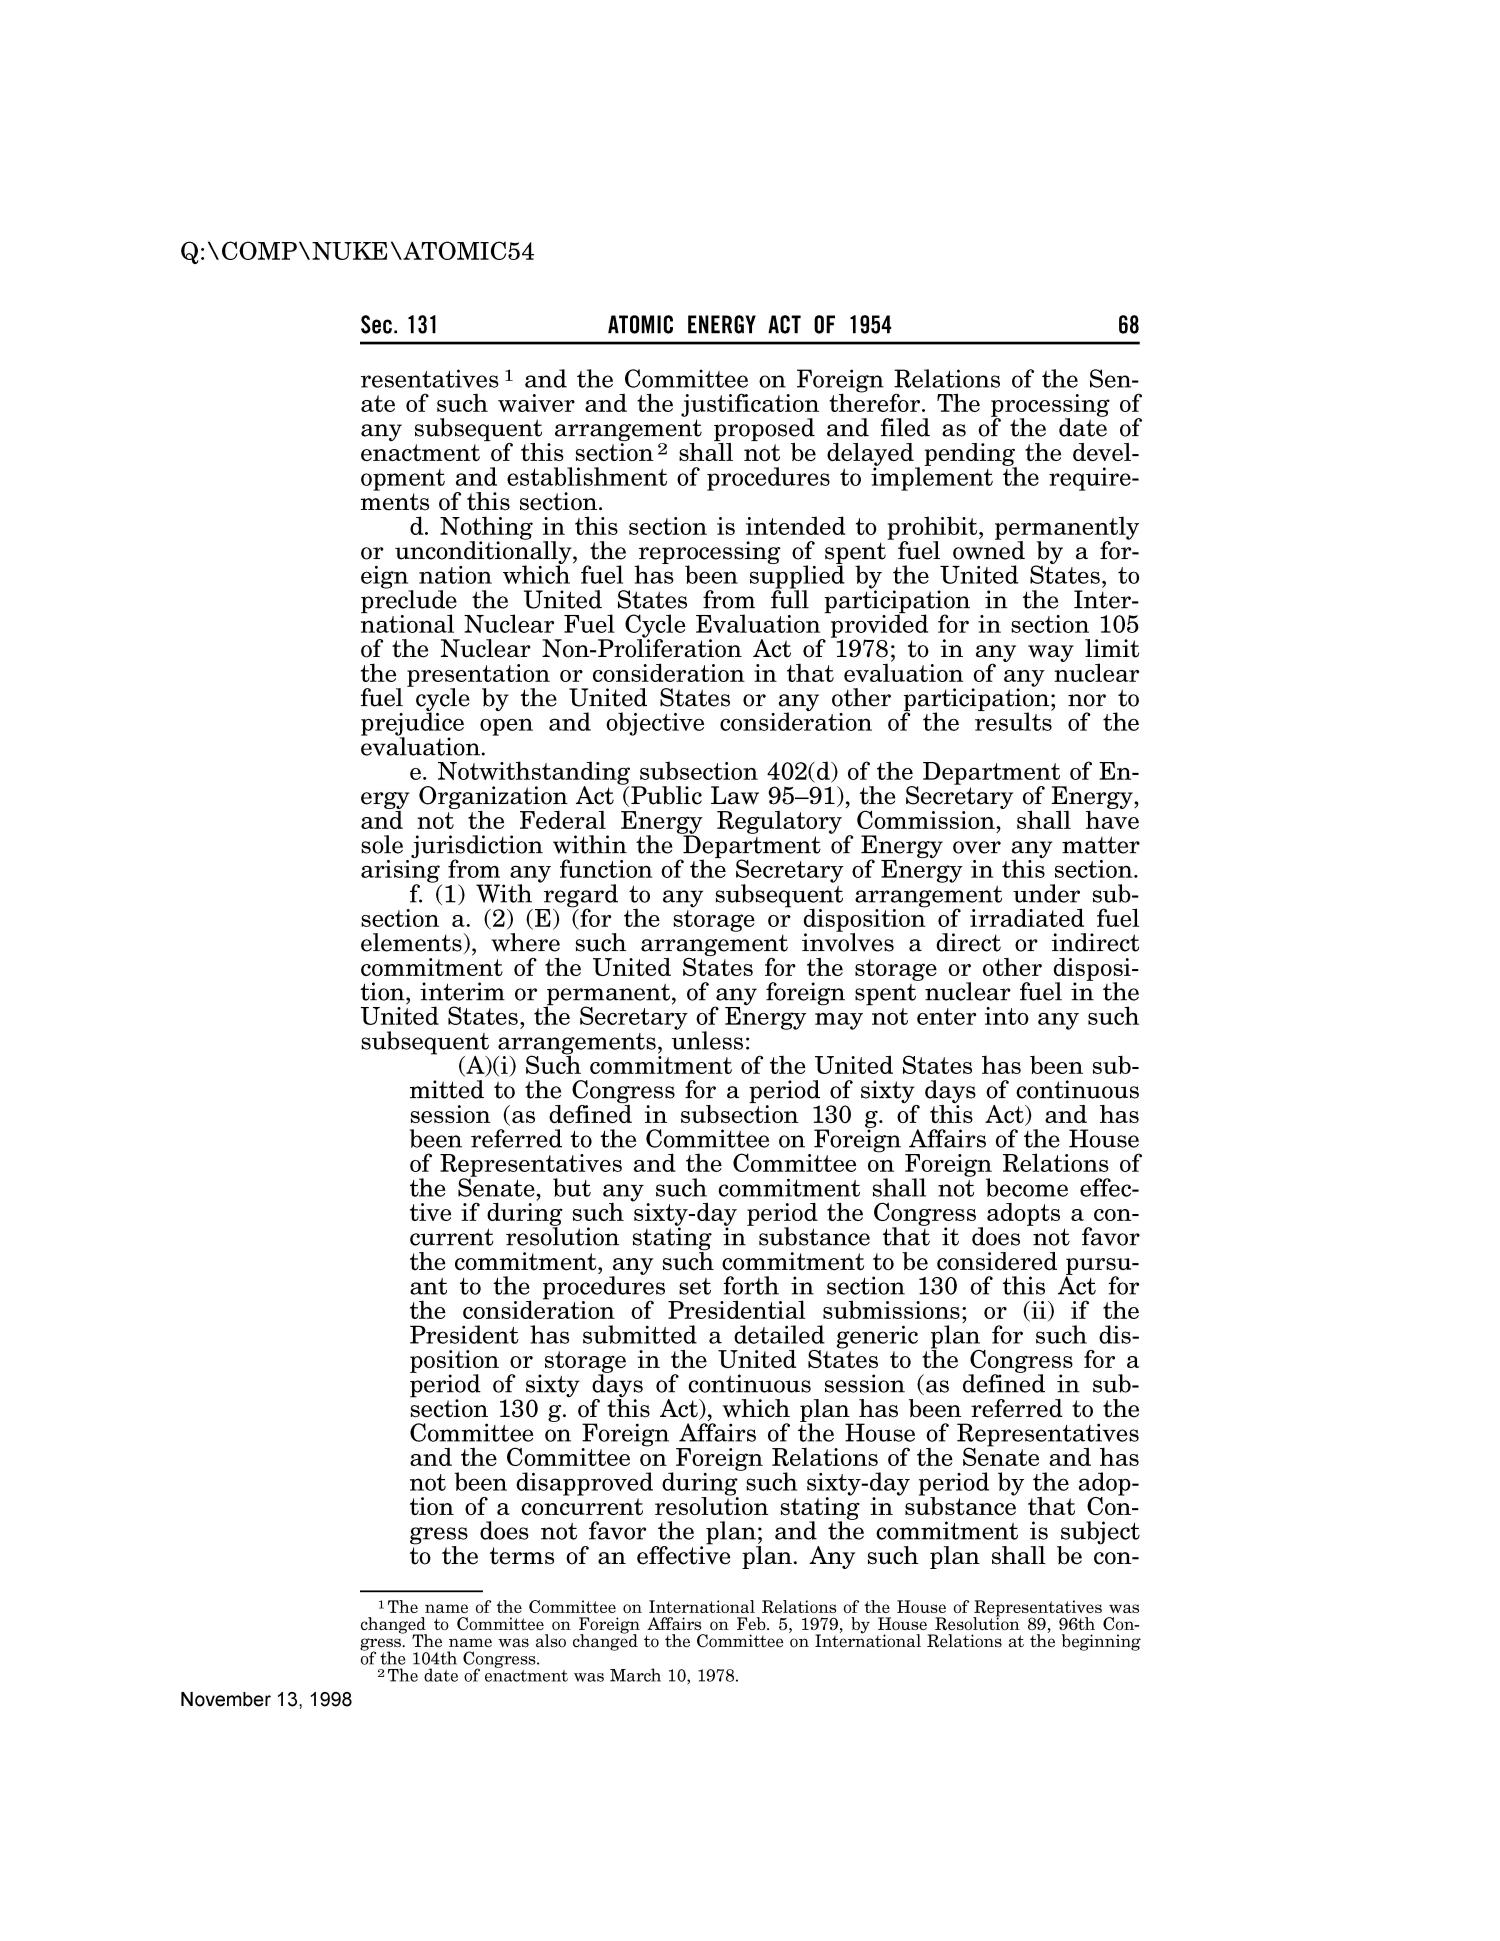 Atomic Energy Act of 1954 [As Amended Through P.L. 105-394, November 13, 1998]: An Act for the development and control of atomic energy
                                                
                                                    68
                                                